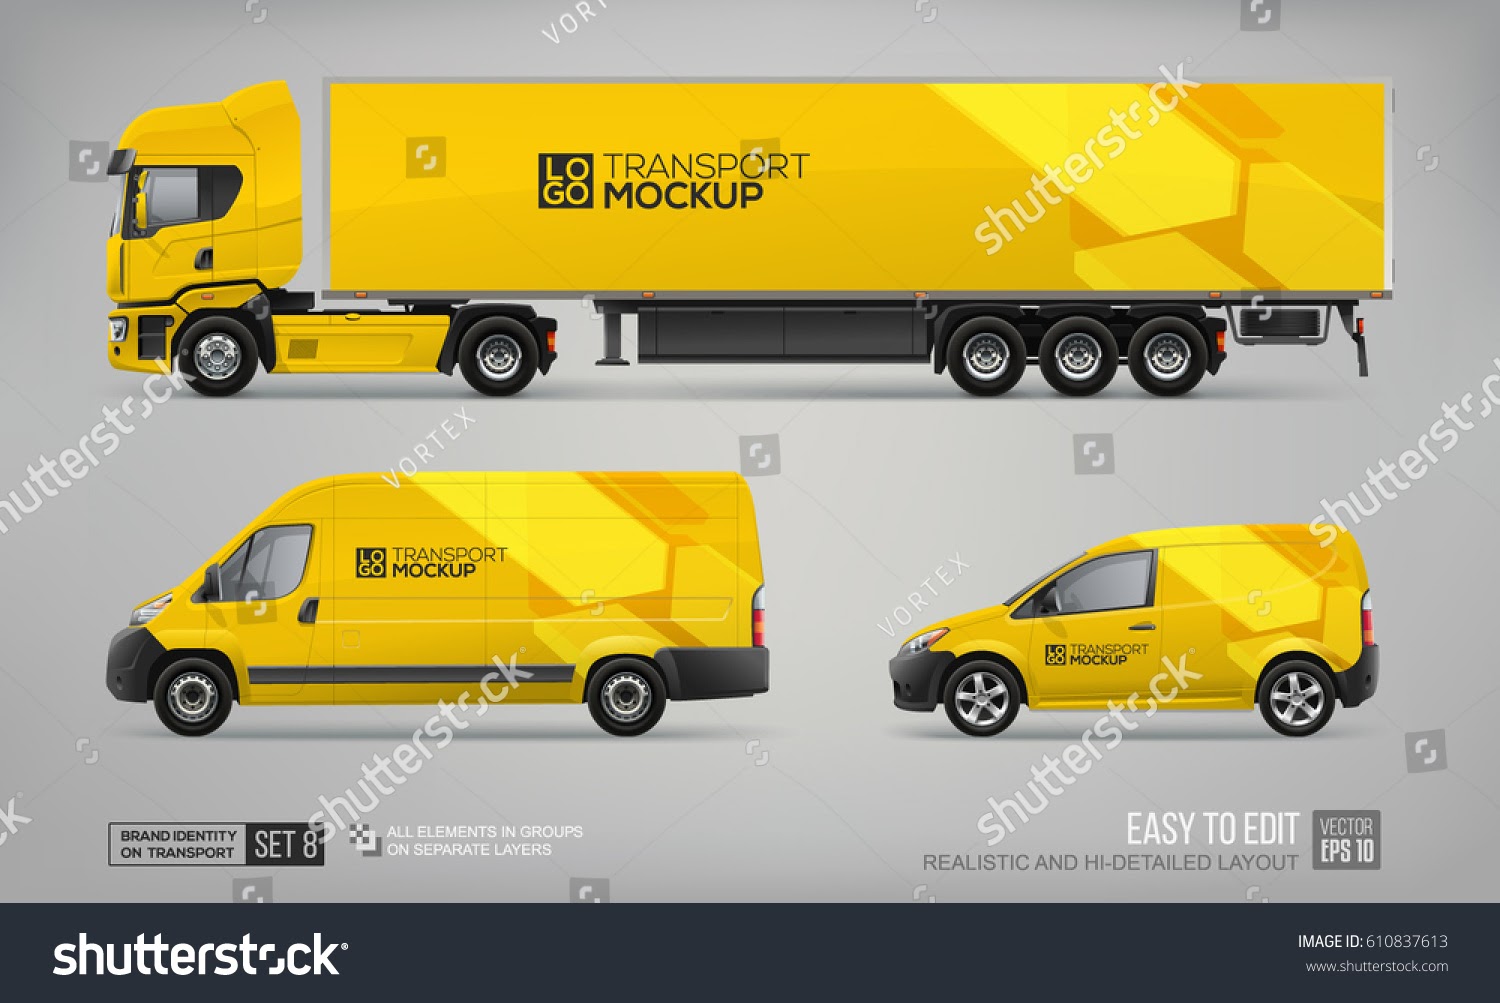 Download Trailer Mockup Psd Free / Newest Handpicked Sets Of Vehicles On Yellow Images Creative Store ...